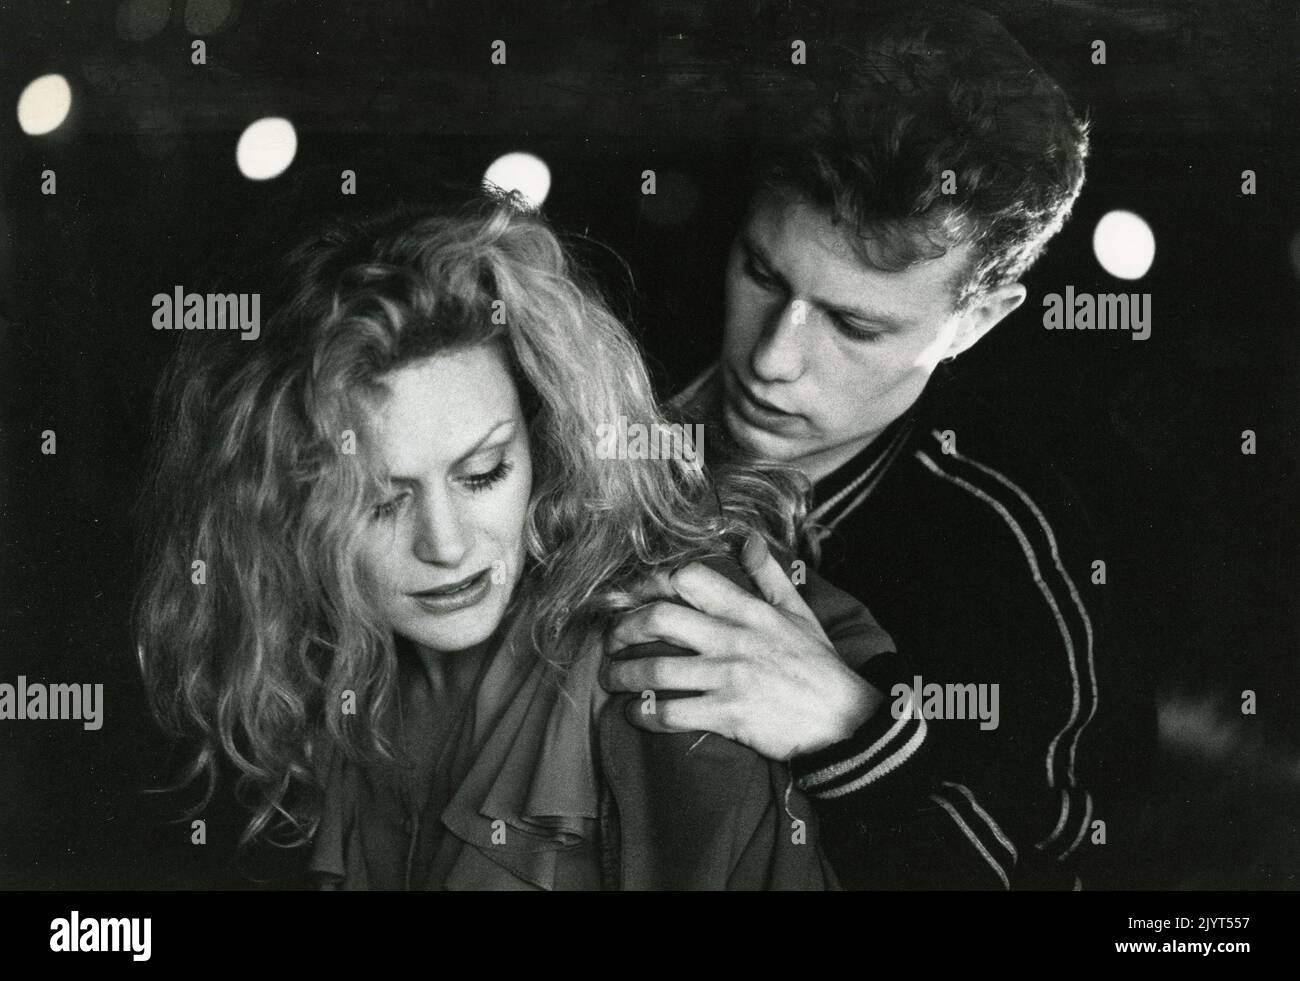 American actress Beverly D'Angelo and actor Niall Byrne in the movie The Miracle, USA 1991 Stock Photo